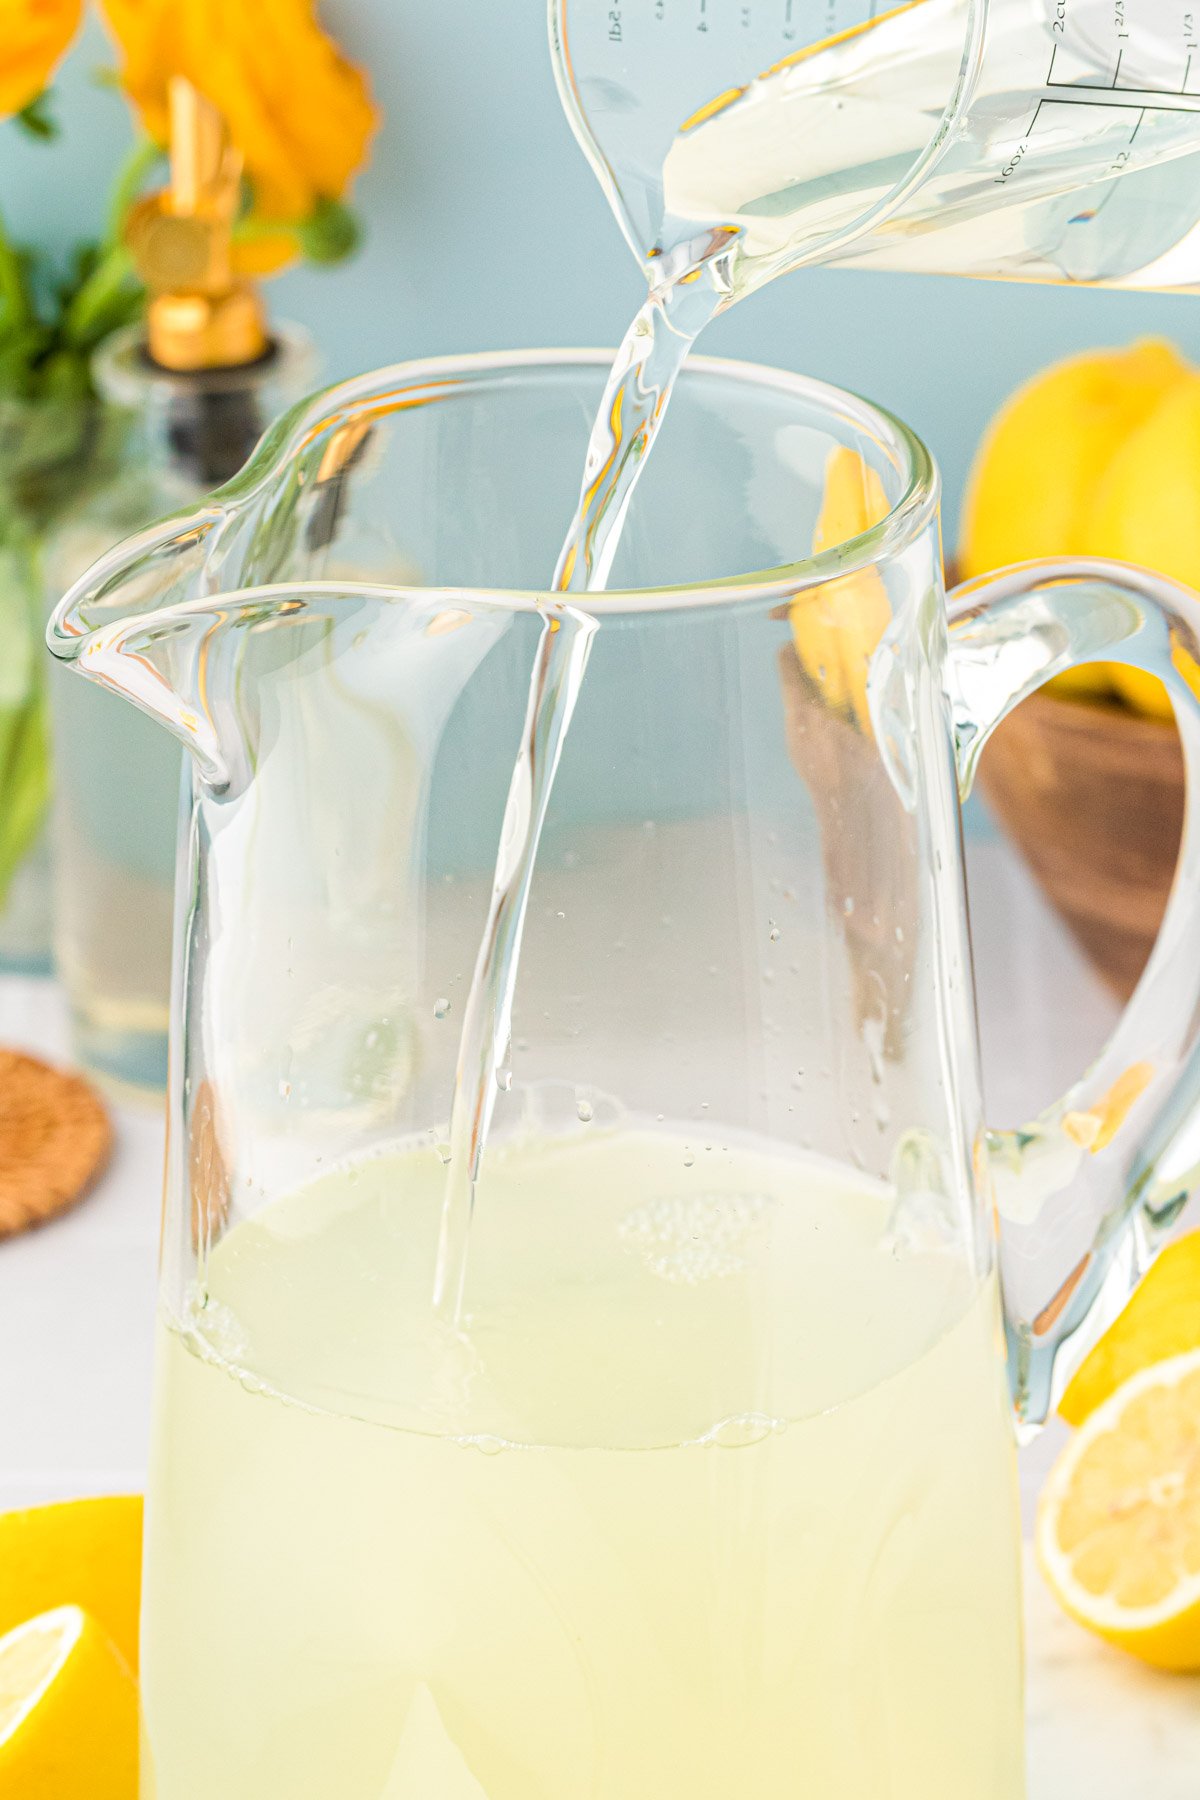 Water being poured into a glass pitcher to make lemonade.